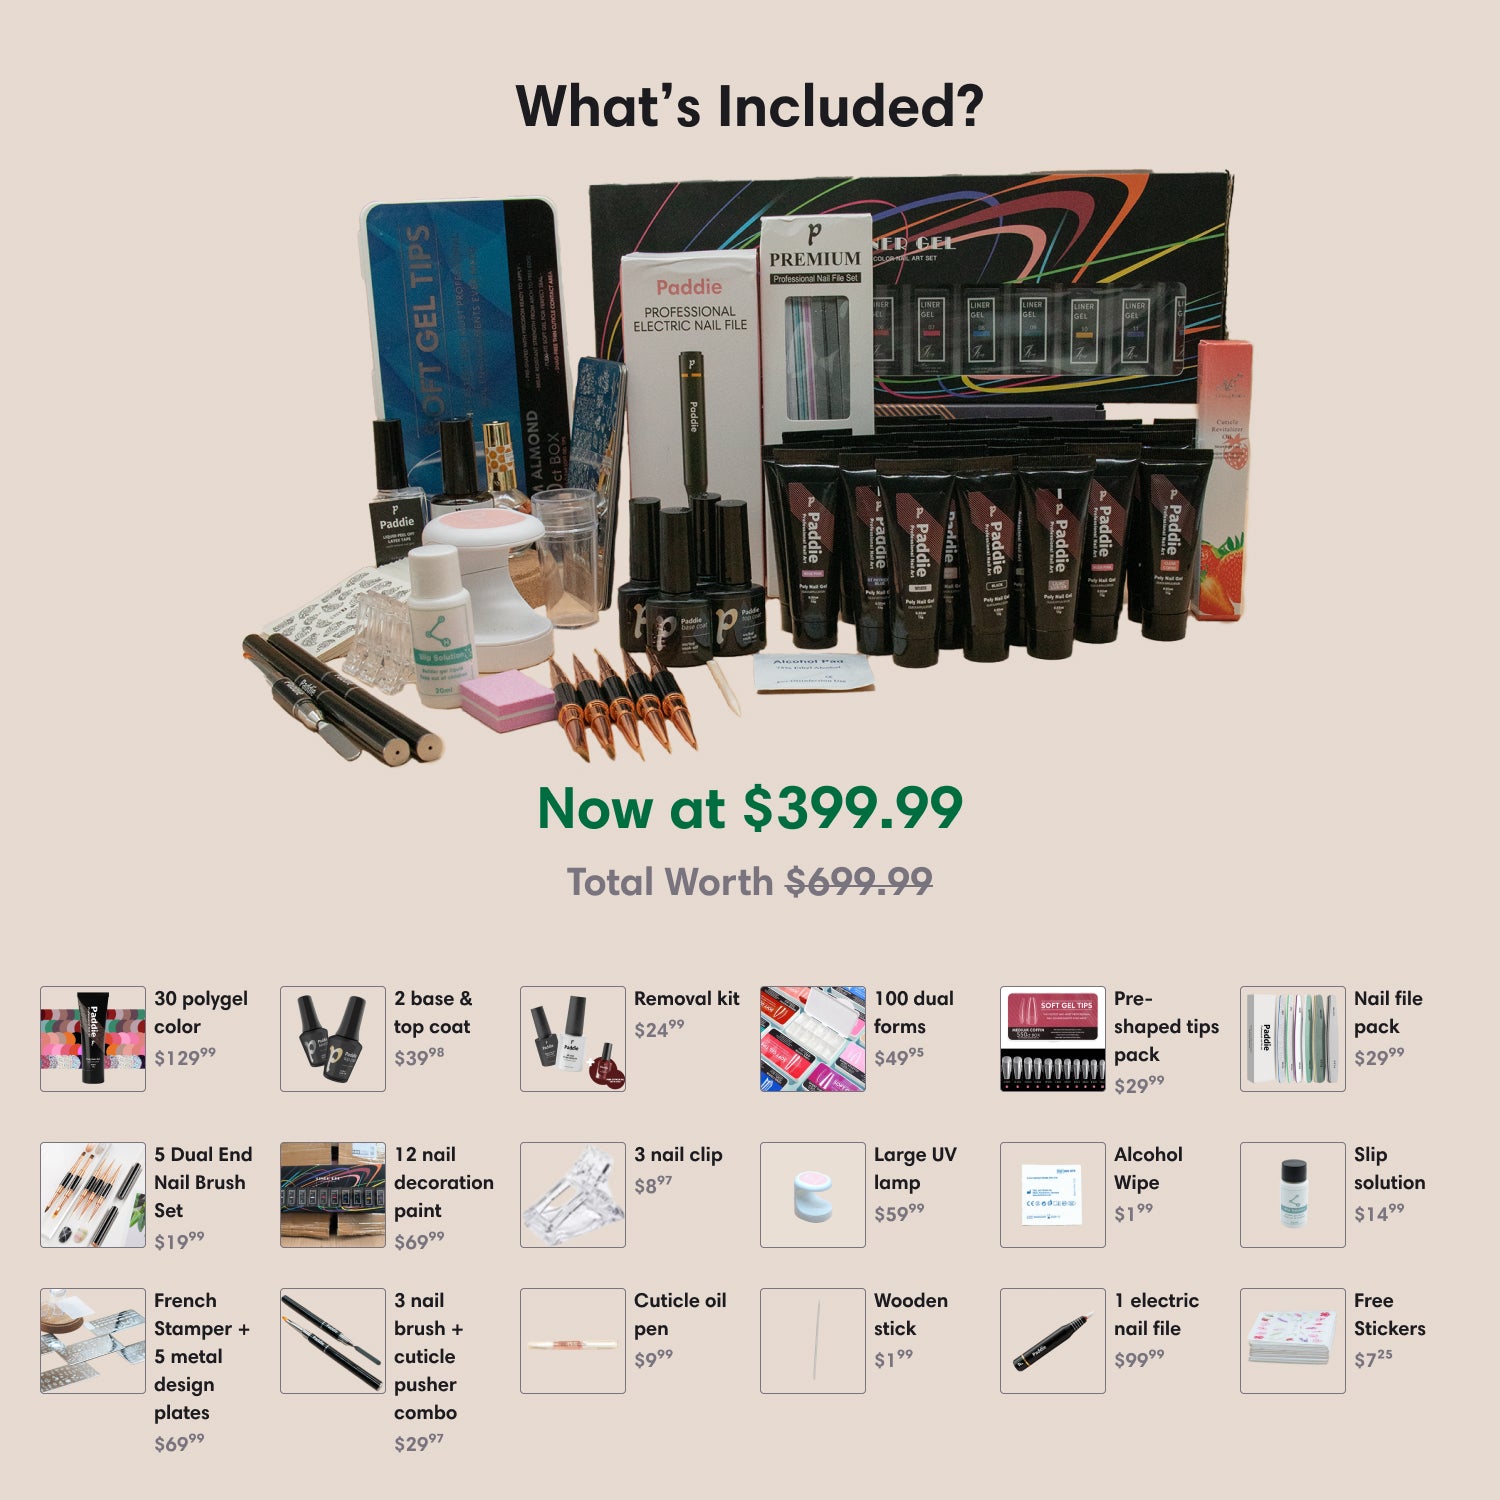 Includes 30 polygel colors, 3 nail clippers, 3 dual-ended nail brush and cuticle pusher combos, 100 dual forms, slip solution, a large UV lamp, 2 base and top coats, a nail file pack, a wooden stick, alcohol wipes, a removal kit, a cuticle oil pen, a French nail art stamp, 5 metal design plates, a pack of pre-shaped tips, 5 dual-ended nail brushes, 12 nail decoration paints, an electric nail file, and a free sticker pack.